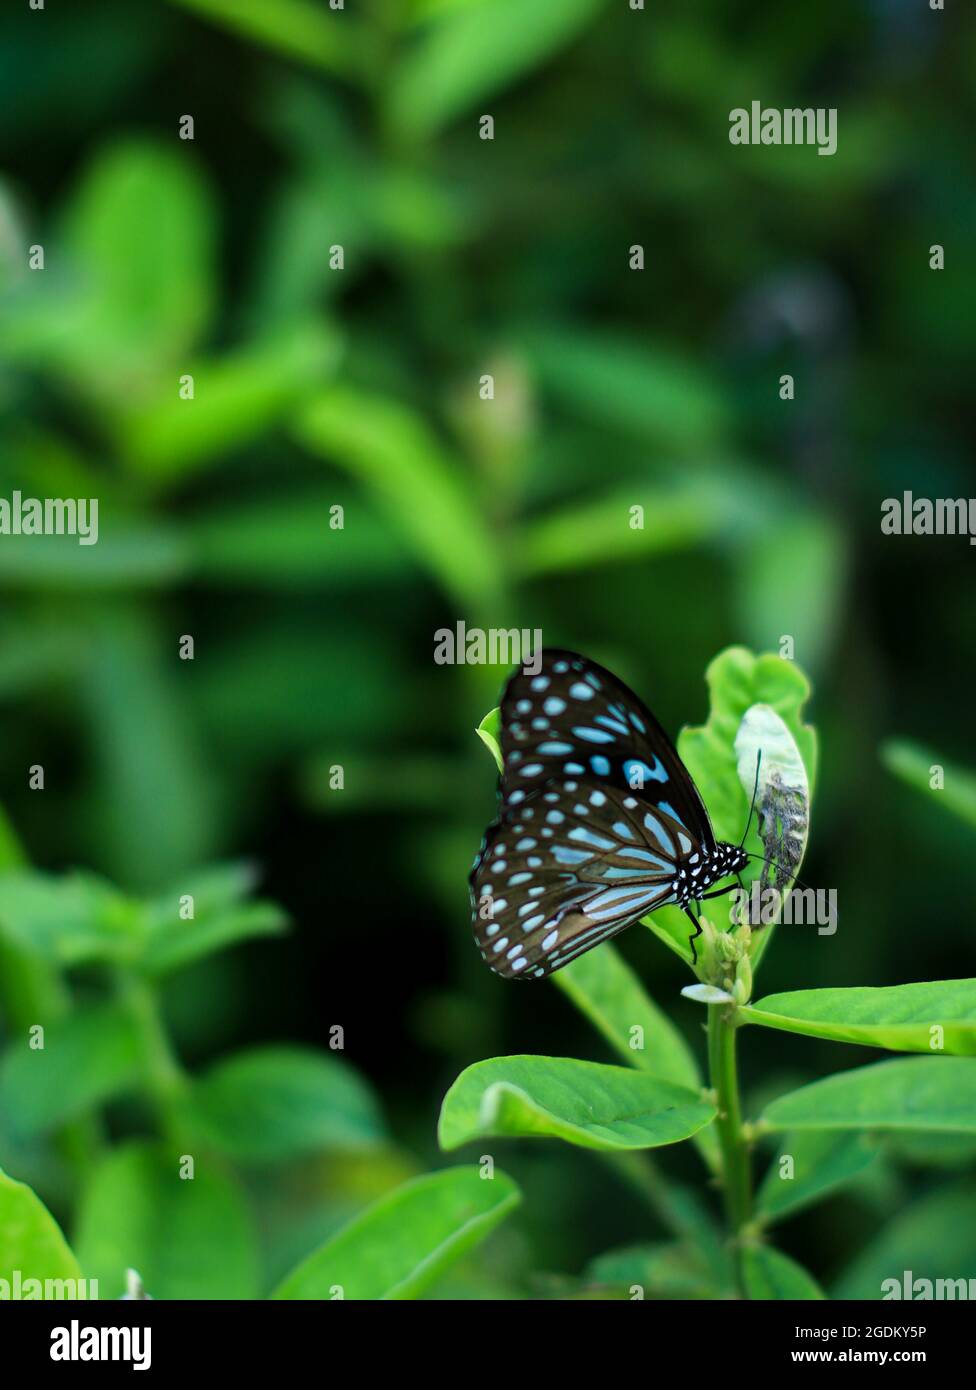 black-blue tiger butterfly with beautiful pattern on the wings sitting on a flower in a lush, green garden on a summer morning Stock Photo